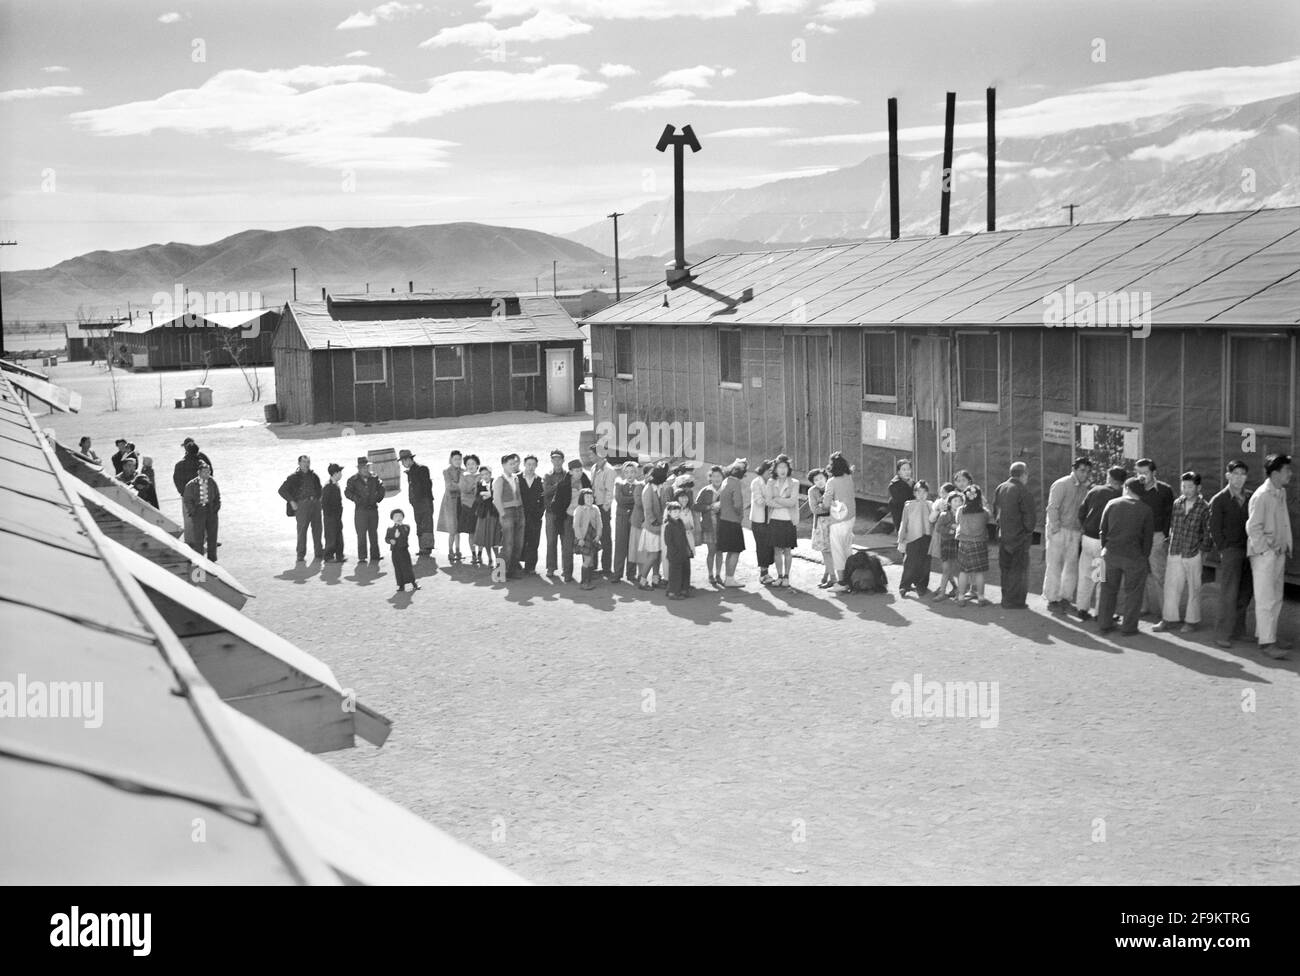 Japanese-Americans waiting in line at Mess Hall, Manzanar Relocation Center, California, USA, Ansel Adams, Manzanar War Relocation Center Collection, 1943 Stock Photo